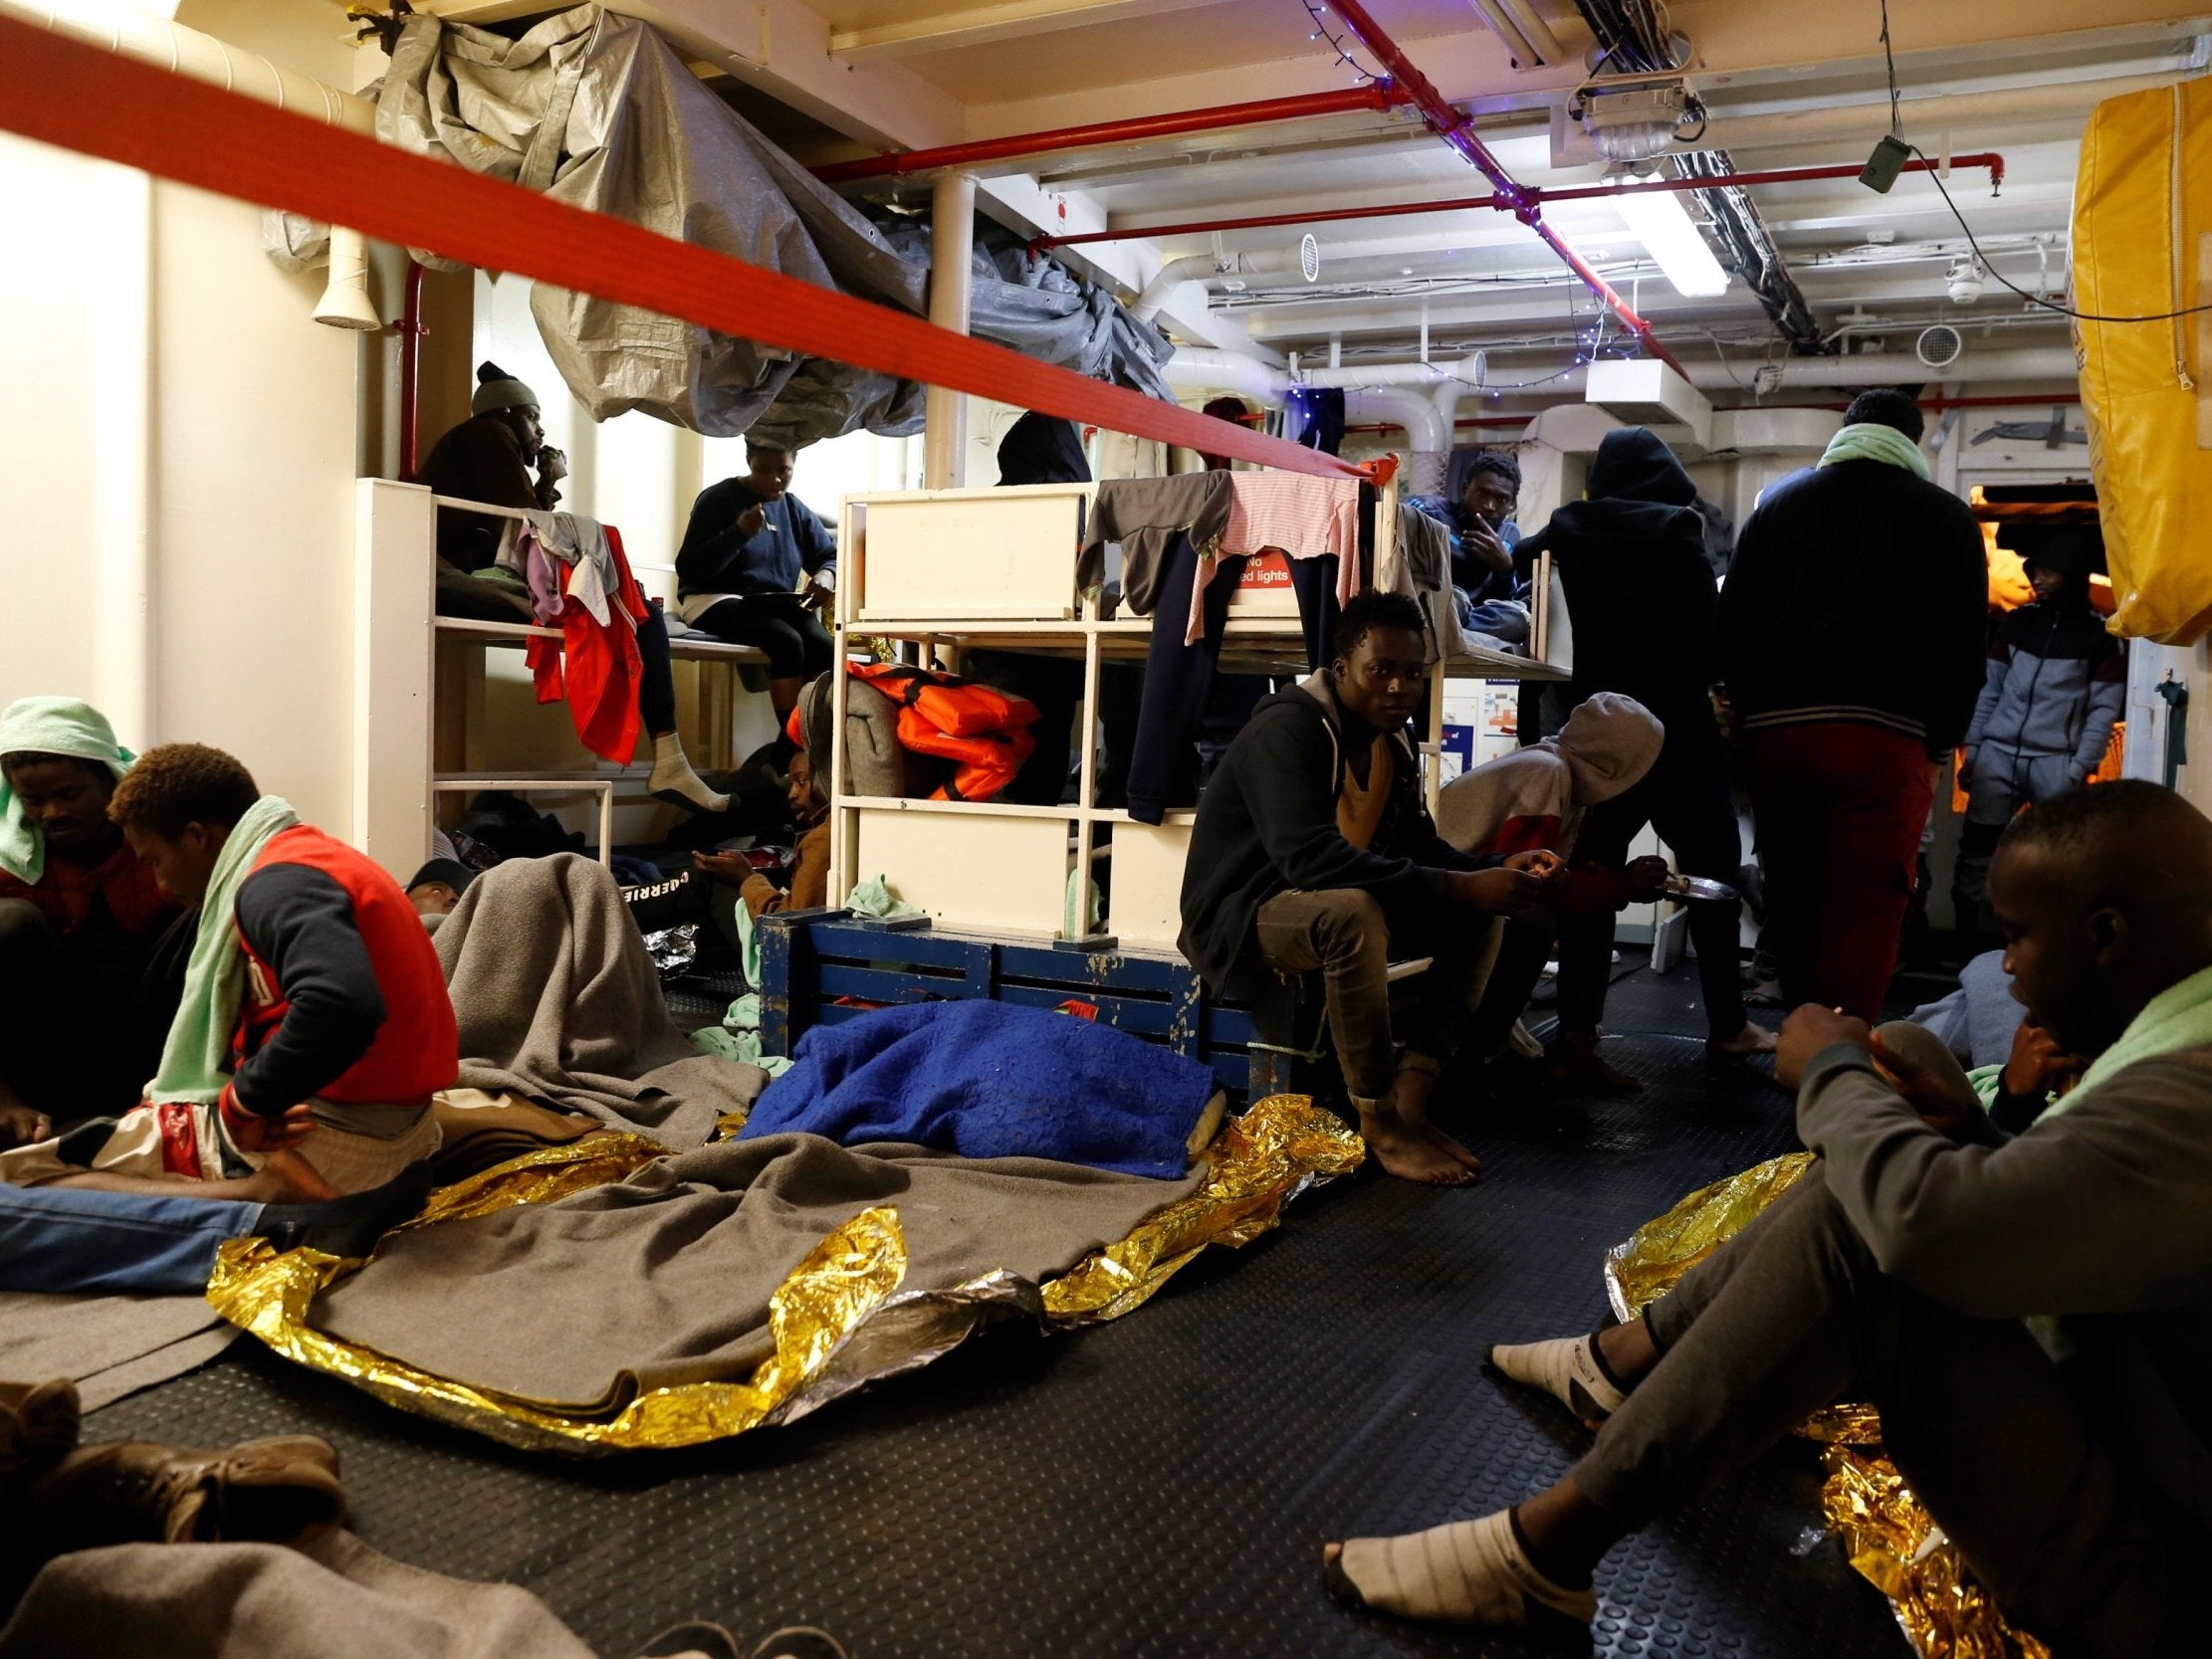 Migrants rest on the migrant search and rescue ship Sea-Watch 3, operated by German NGO Sea-Watch, off the coast of Malta in the central Mediterranean Sea 3 January, 2019. (Reuters/Darrin Zammit Lupi)